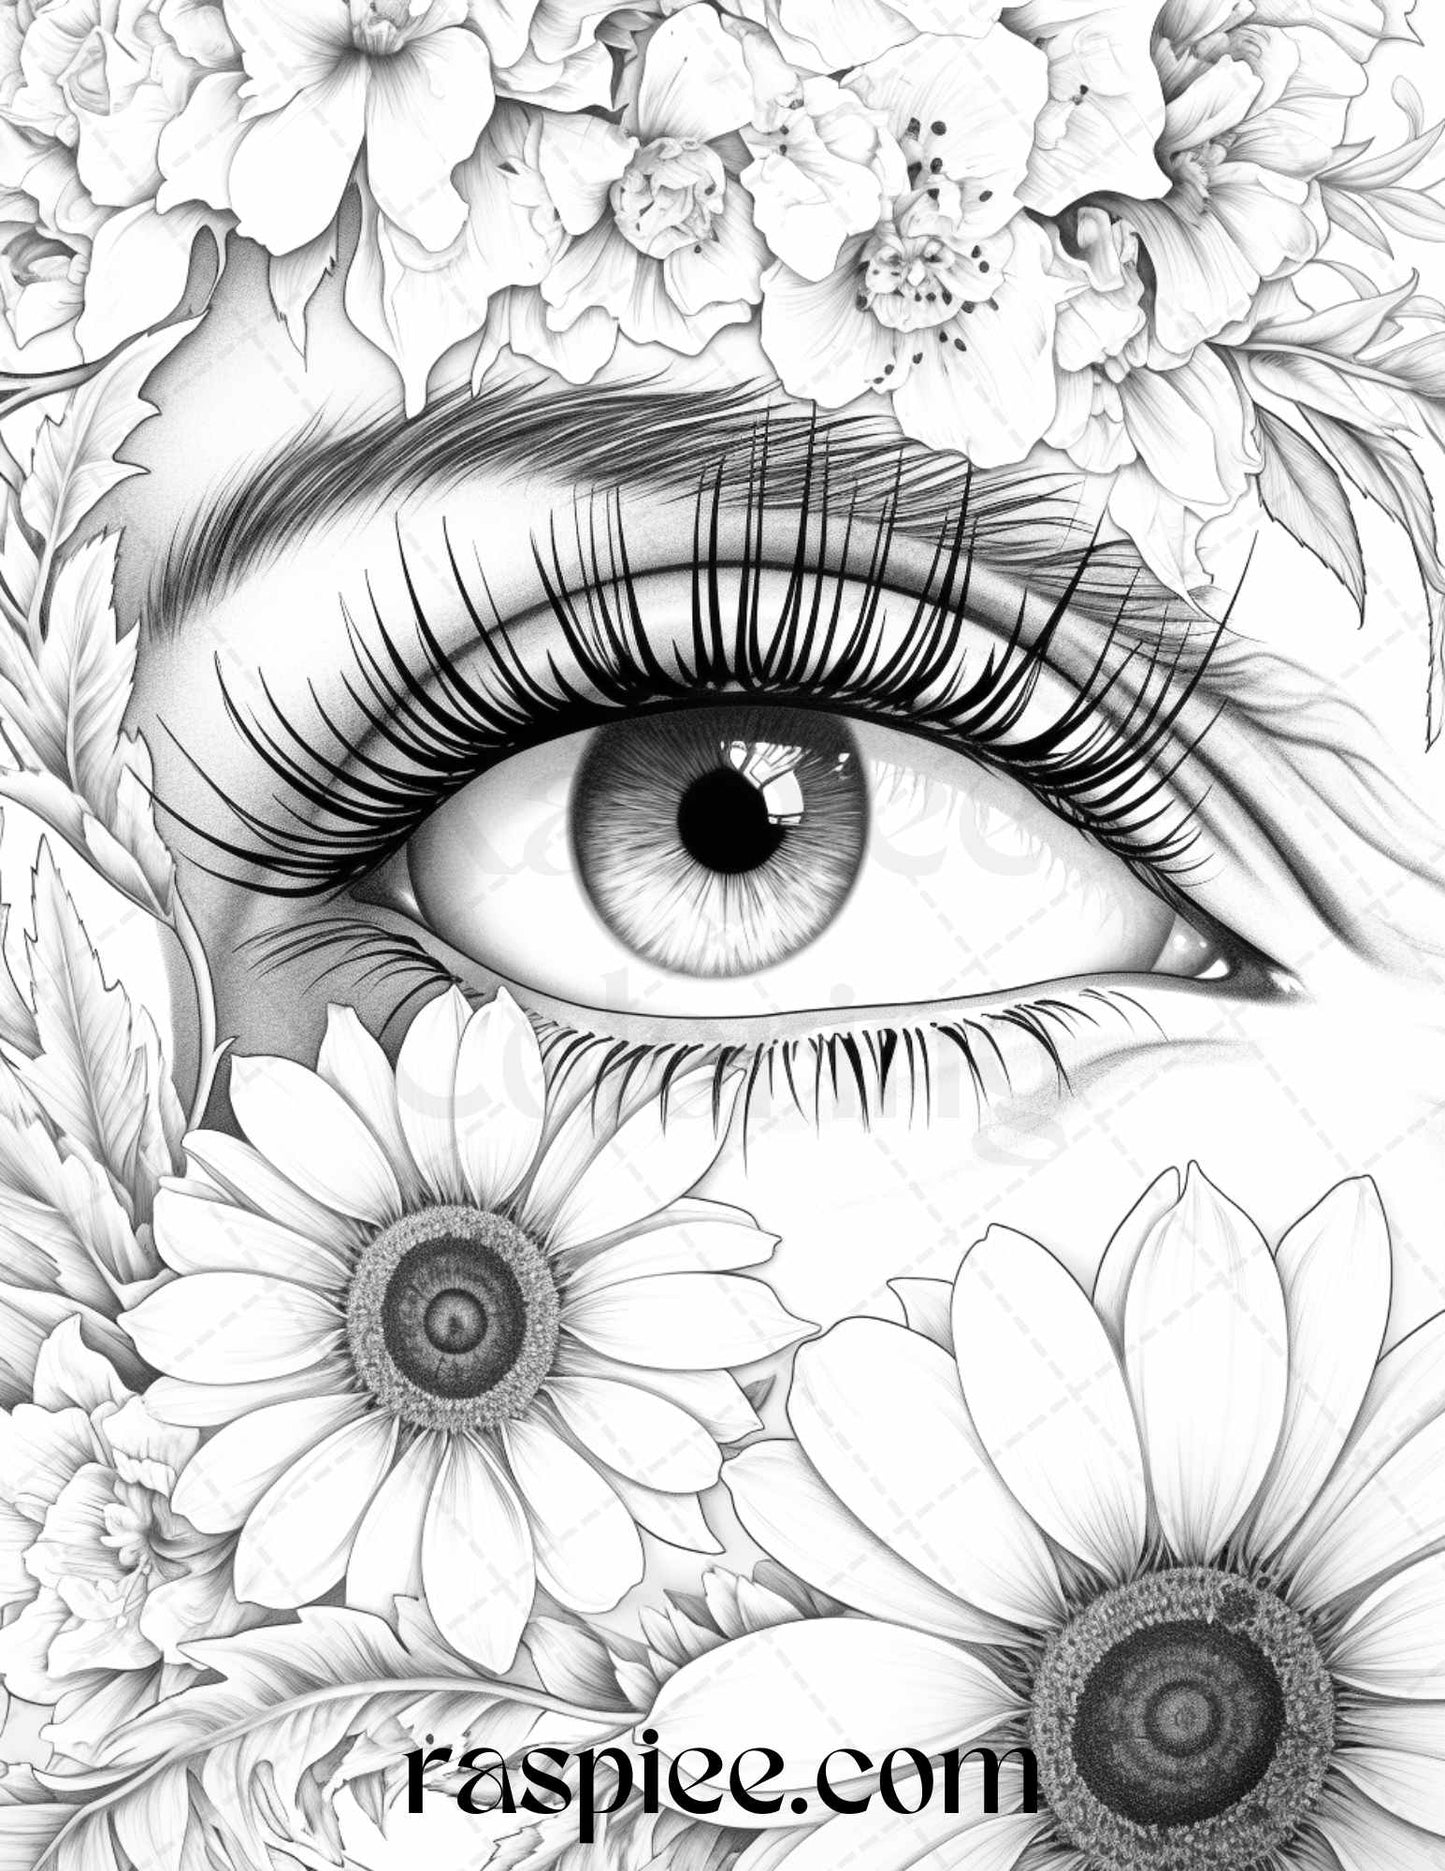 Charming Eyes Grayscale Coloring Pages for Adults, Relaxing Stress Relief Coloring Activity, Detailed Grayscale Artwork Collection